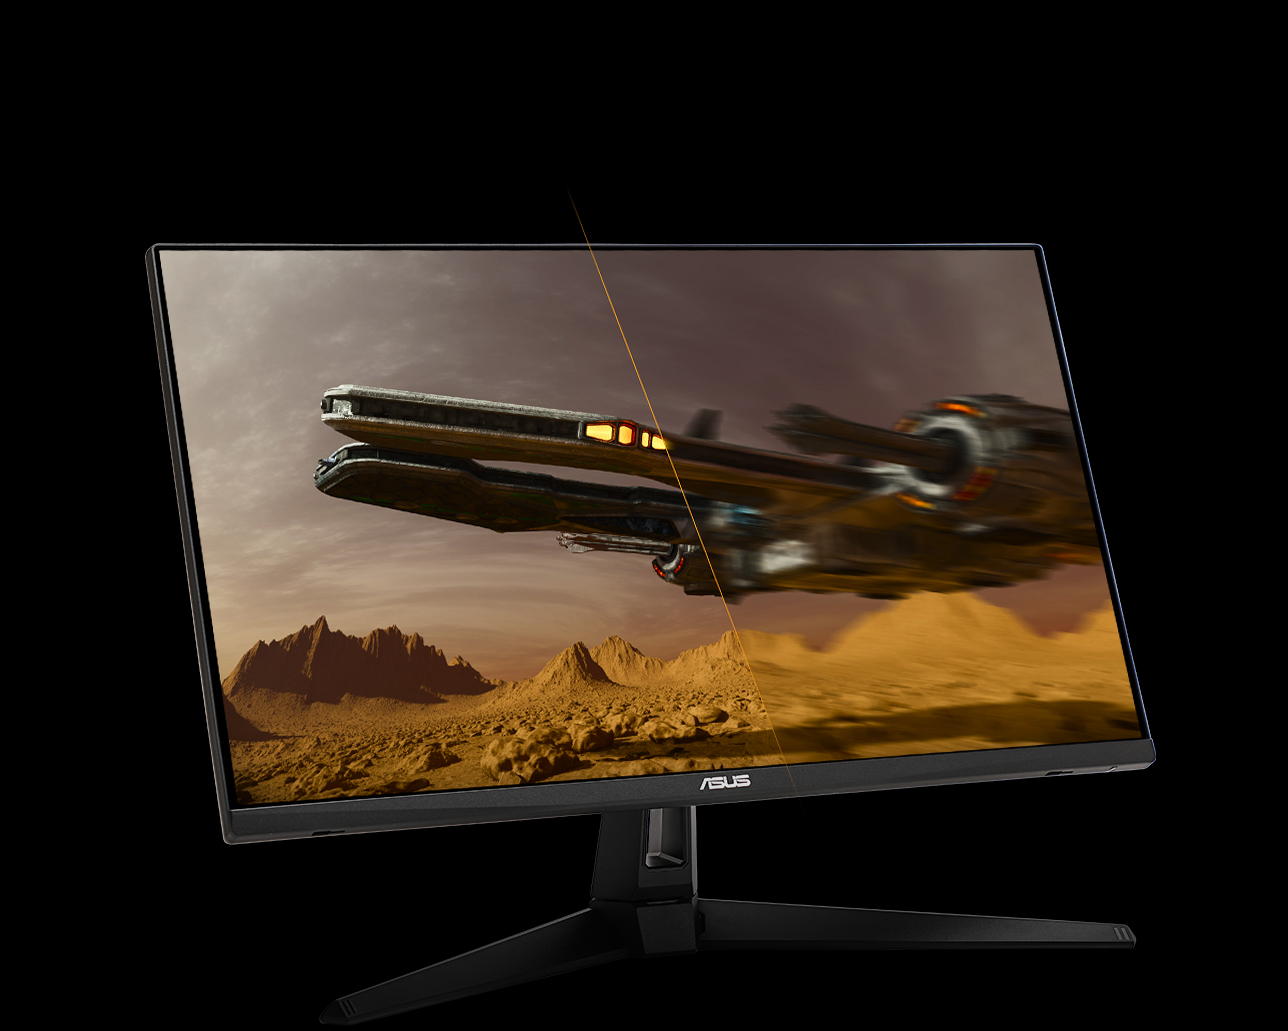 TUF GAMING VG27AQM1A - 260Hz Refresh Rate